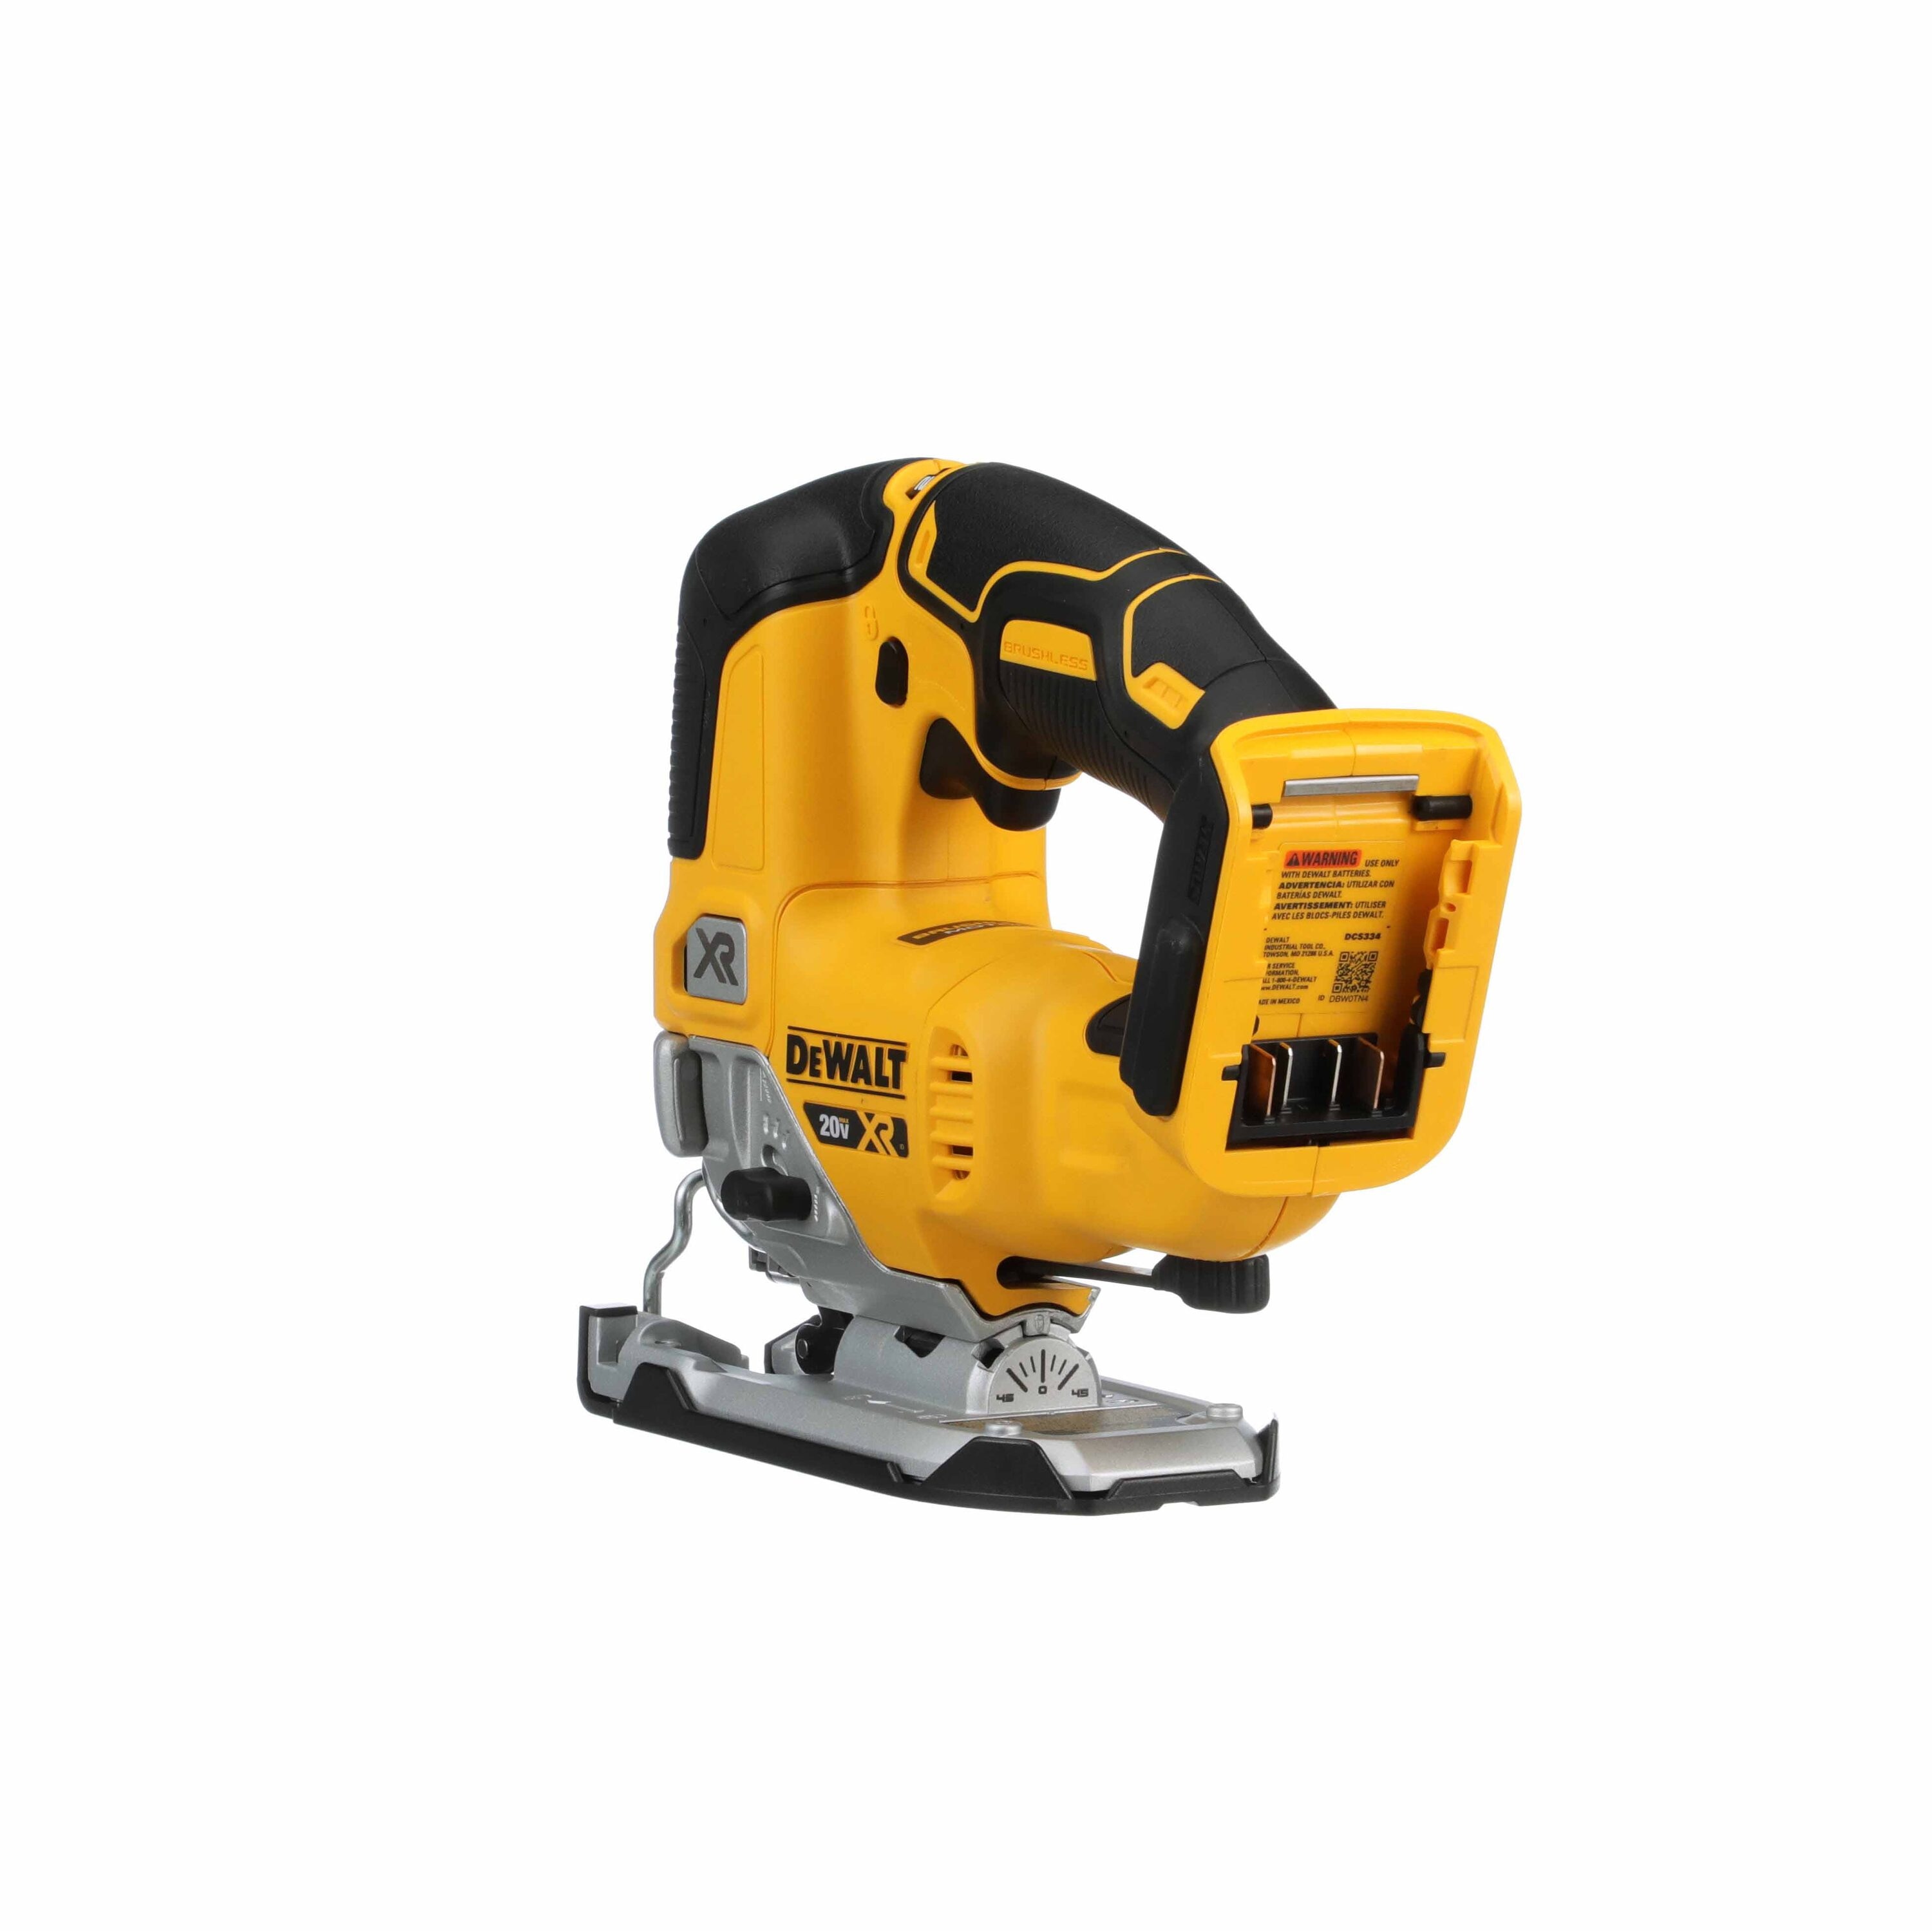 DEWALT XR 20-volt Max Brushless Variable Speed Keyless Cordless Jigsaw (Bare in the Jigsaws department at Lowes.com